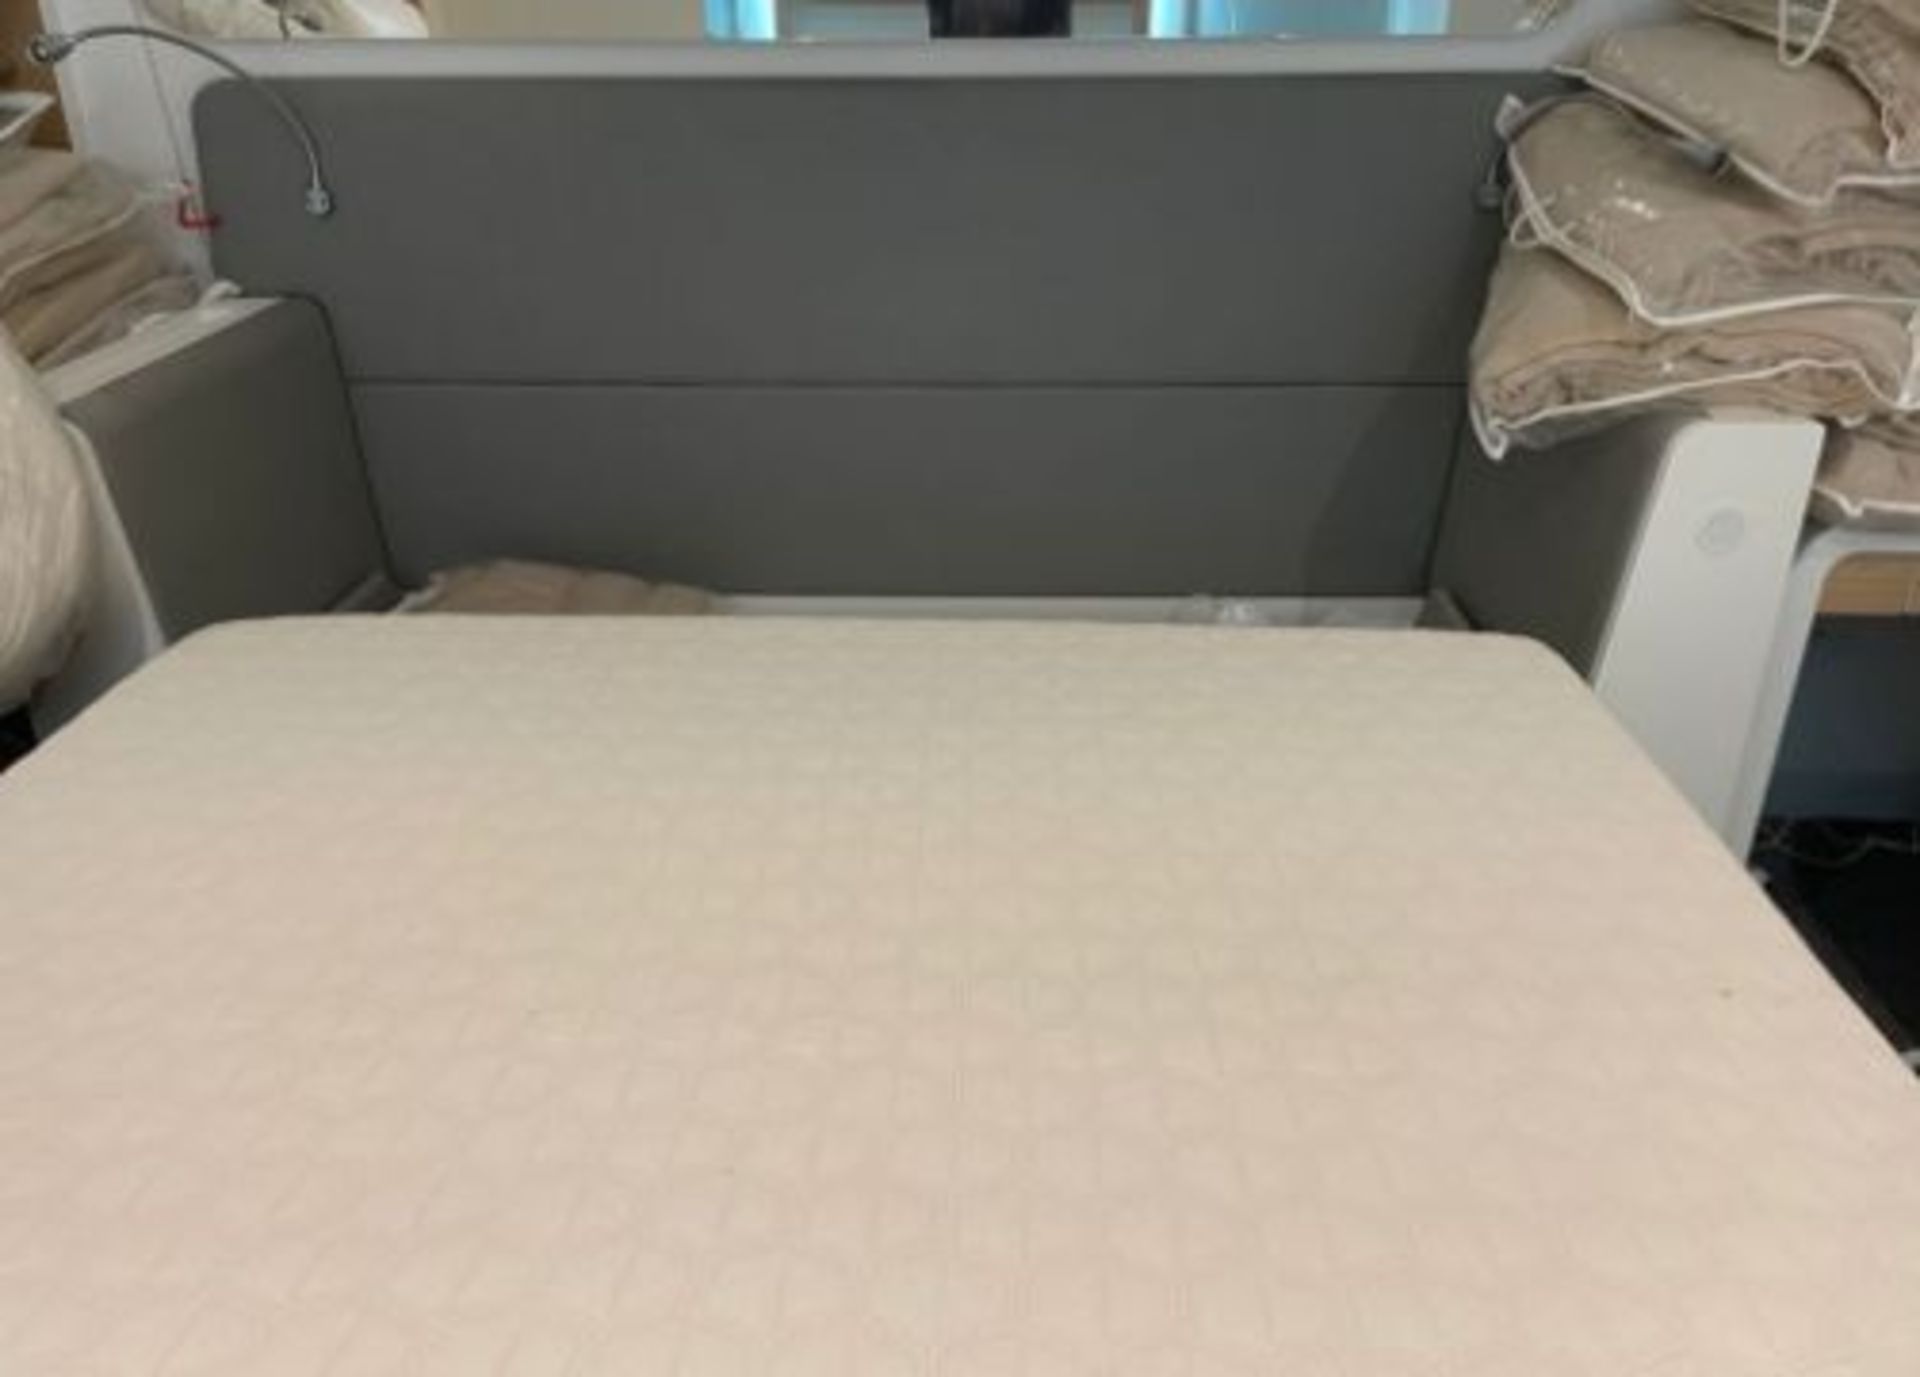 1 x Double Adjustable Space Saving Smart Bed With Serta Motion Memory Foam Mattress - Signature - Image 4 of 11